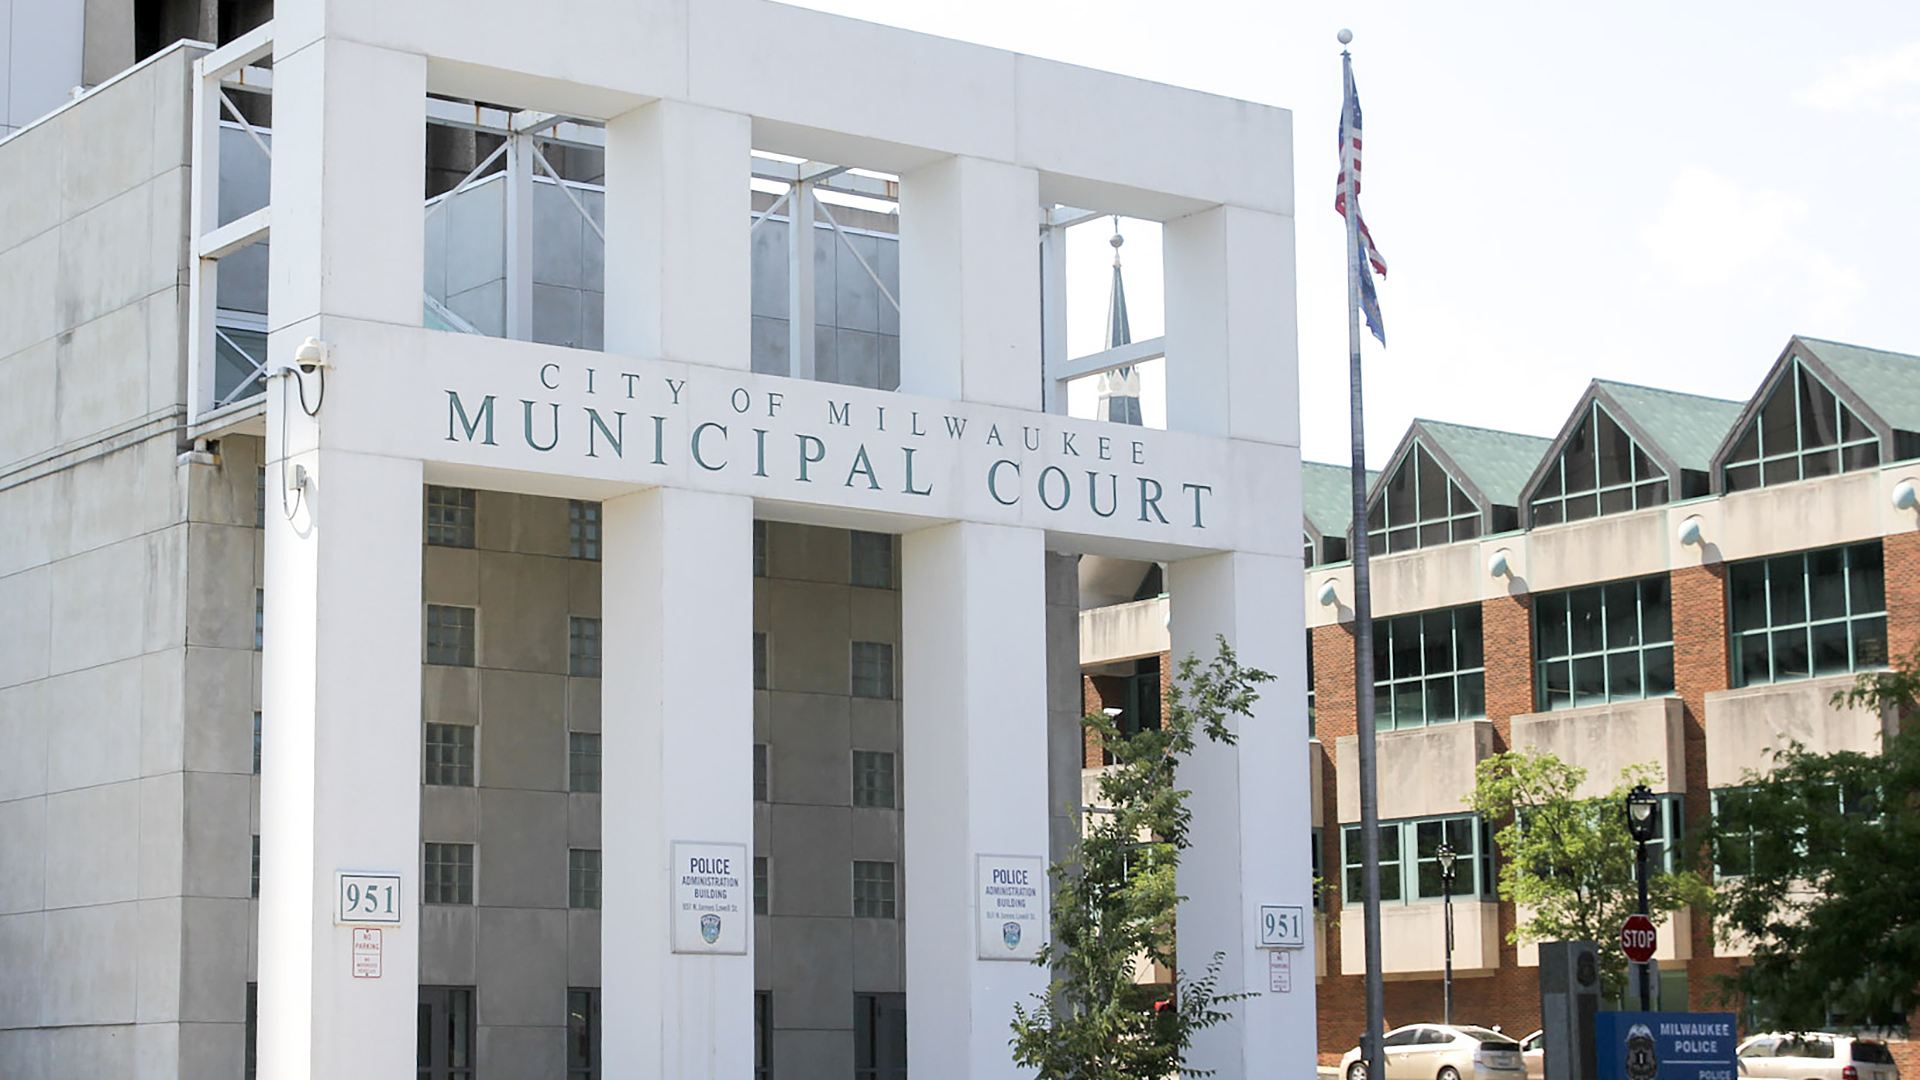 A concrete building with small windows is fronted by a facade with square pillars, a letter sign reading "City of Milwaukee Municipal Court," and smaller signs designating parking spots, with a flagpole, parked cars and another building in the background.